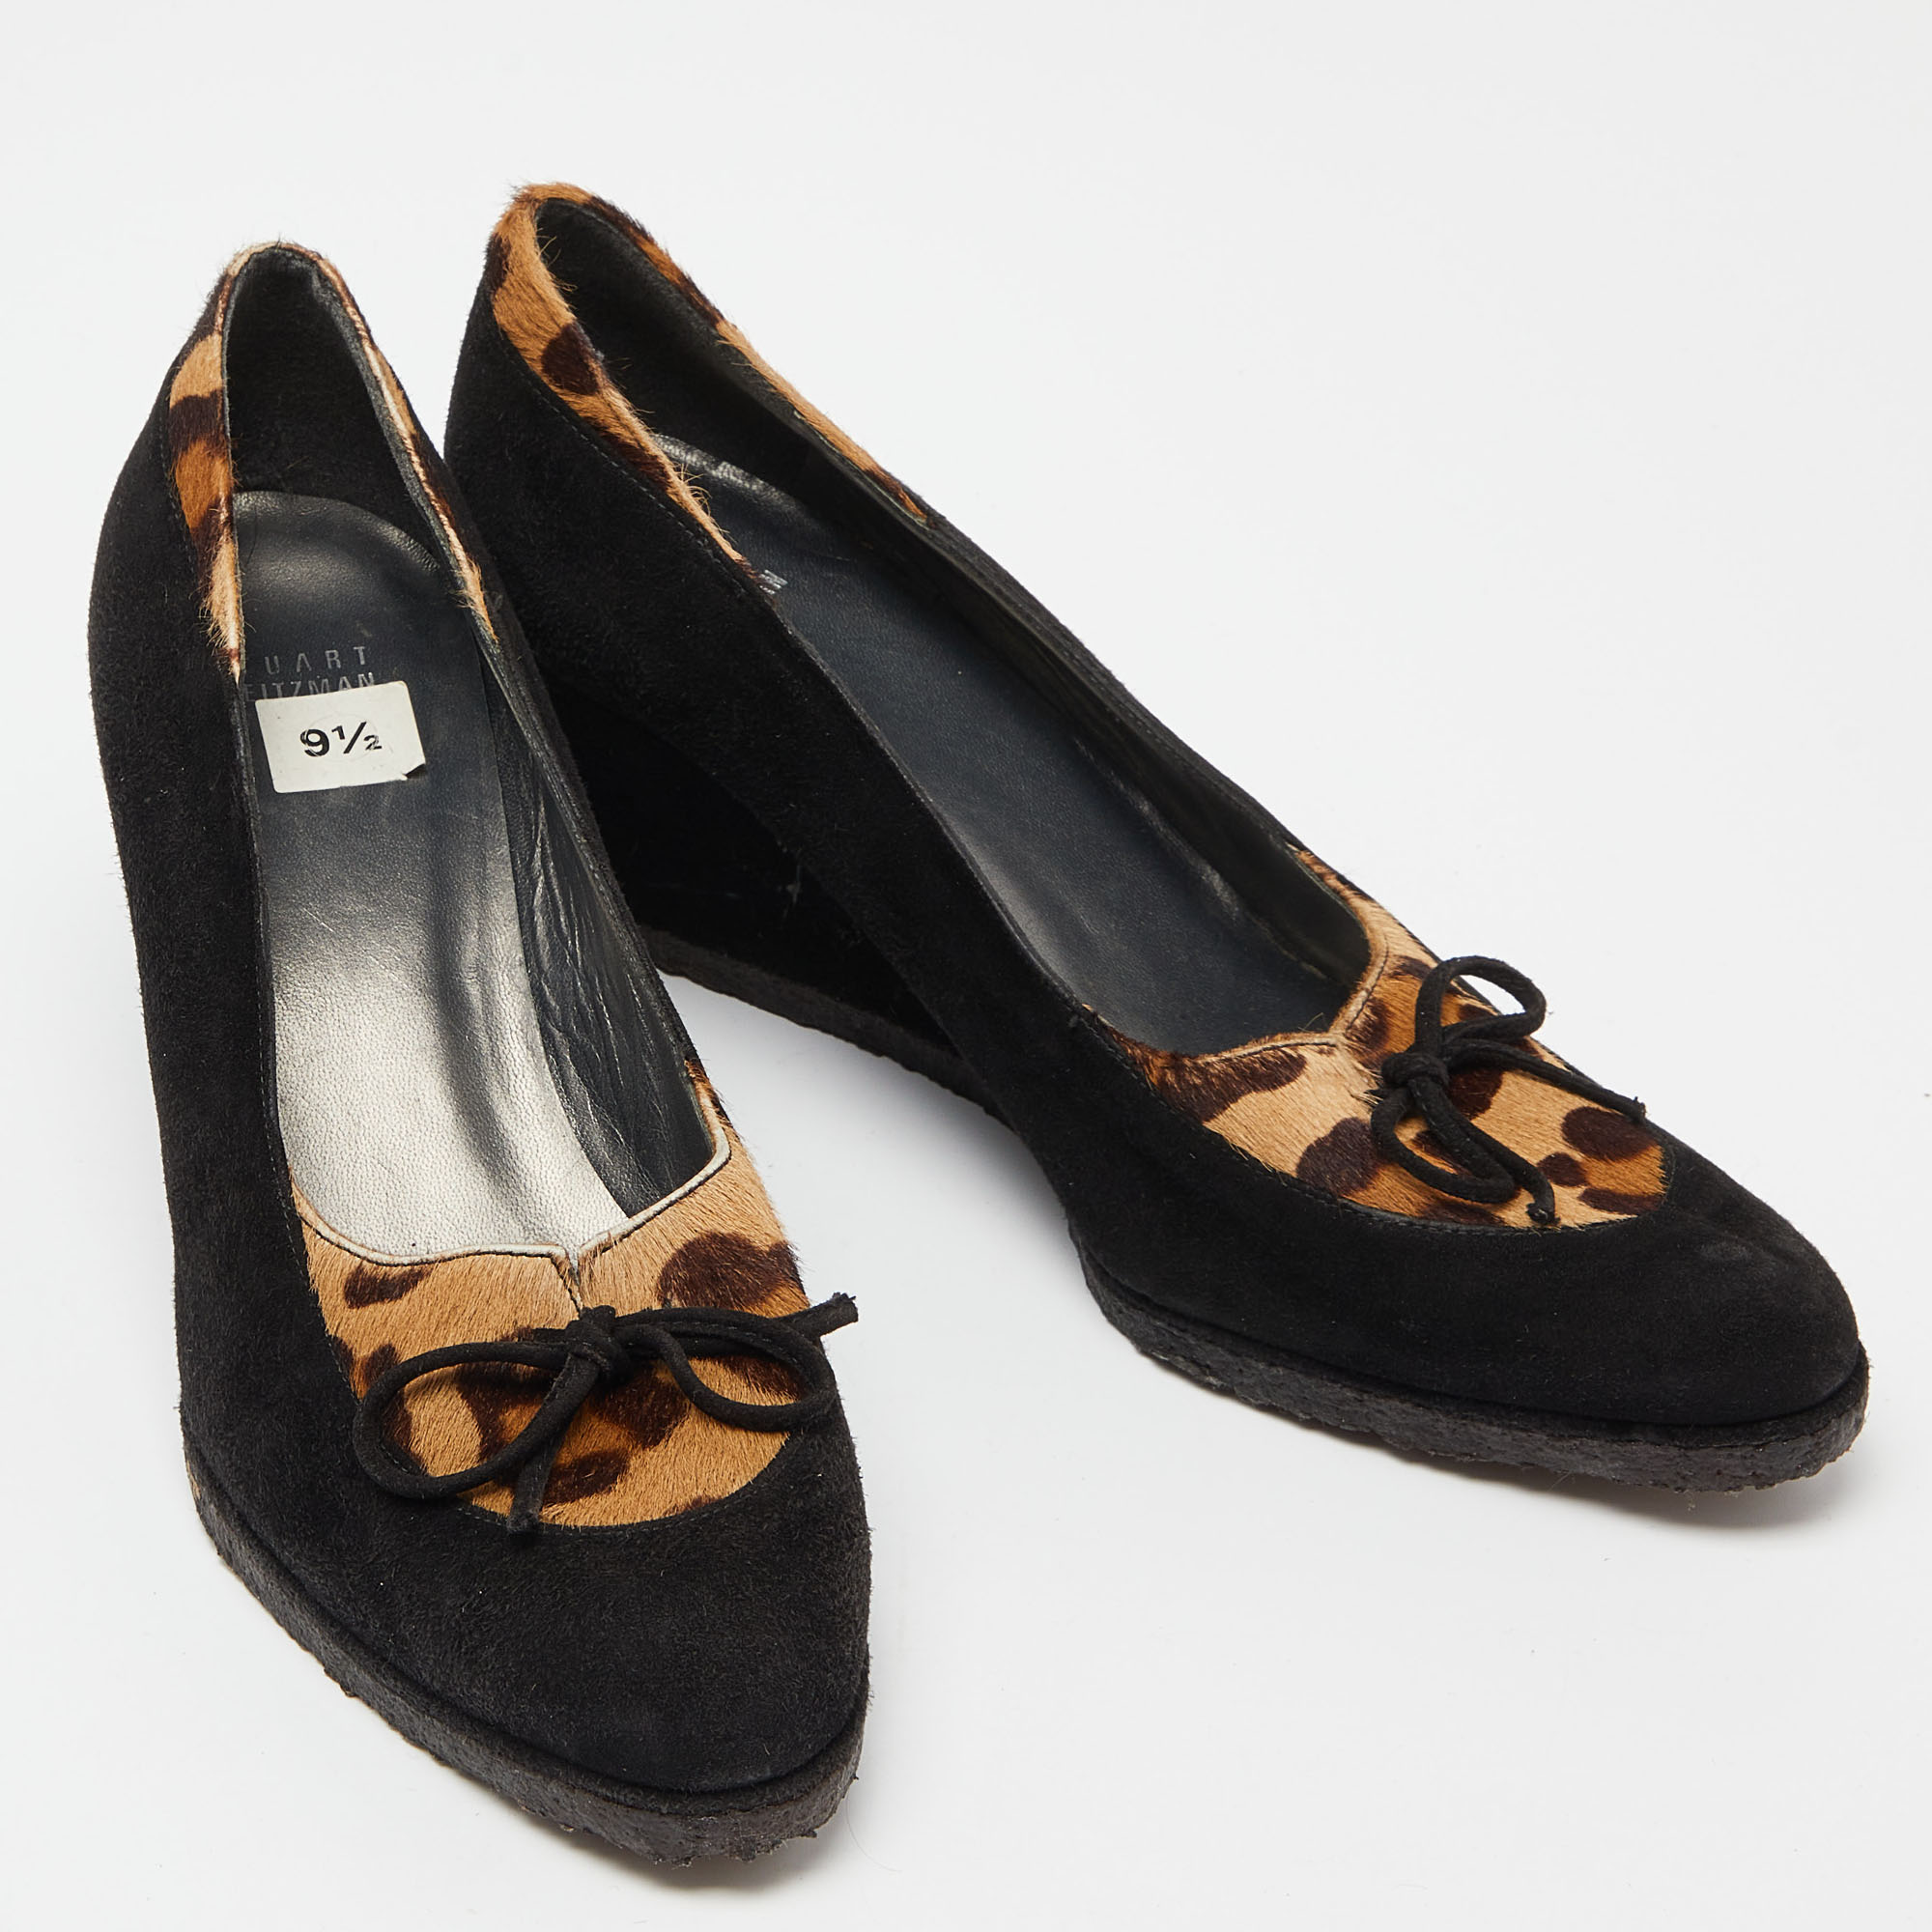 Stuart Weitzman Black/Brown Suede And Calf Hair Wedge Pumps Size 40